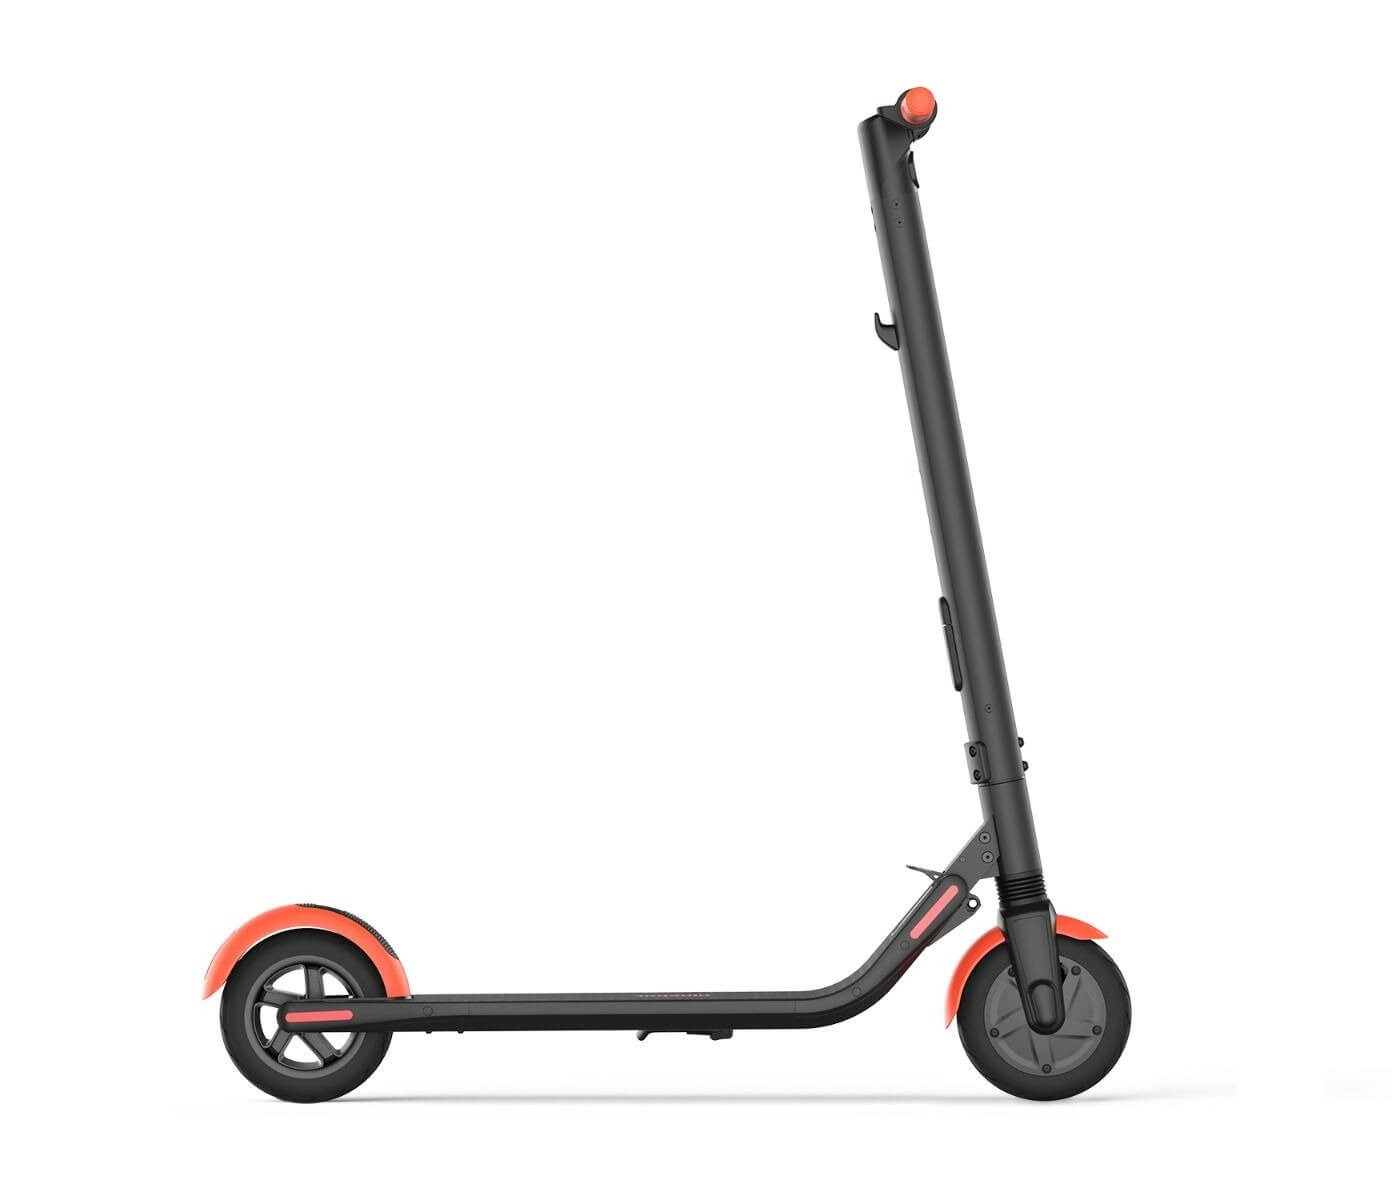 Ninebot ES1L Kick-Scooter by Segway - Certified Pre-Owned